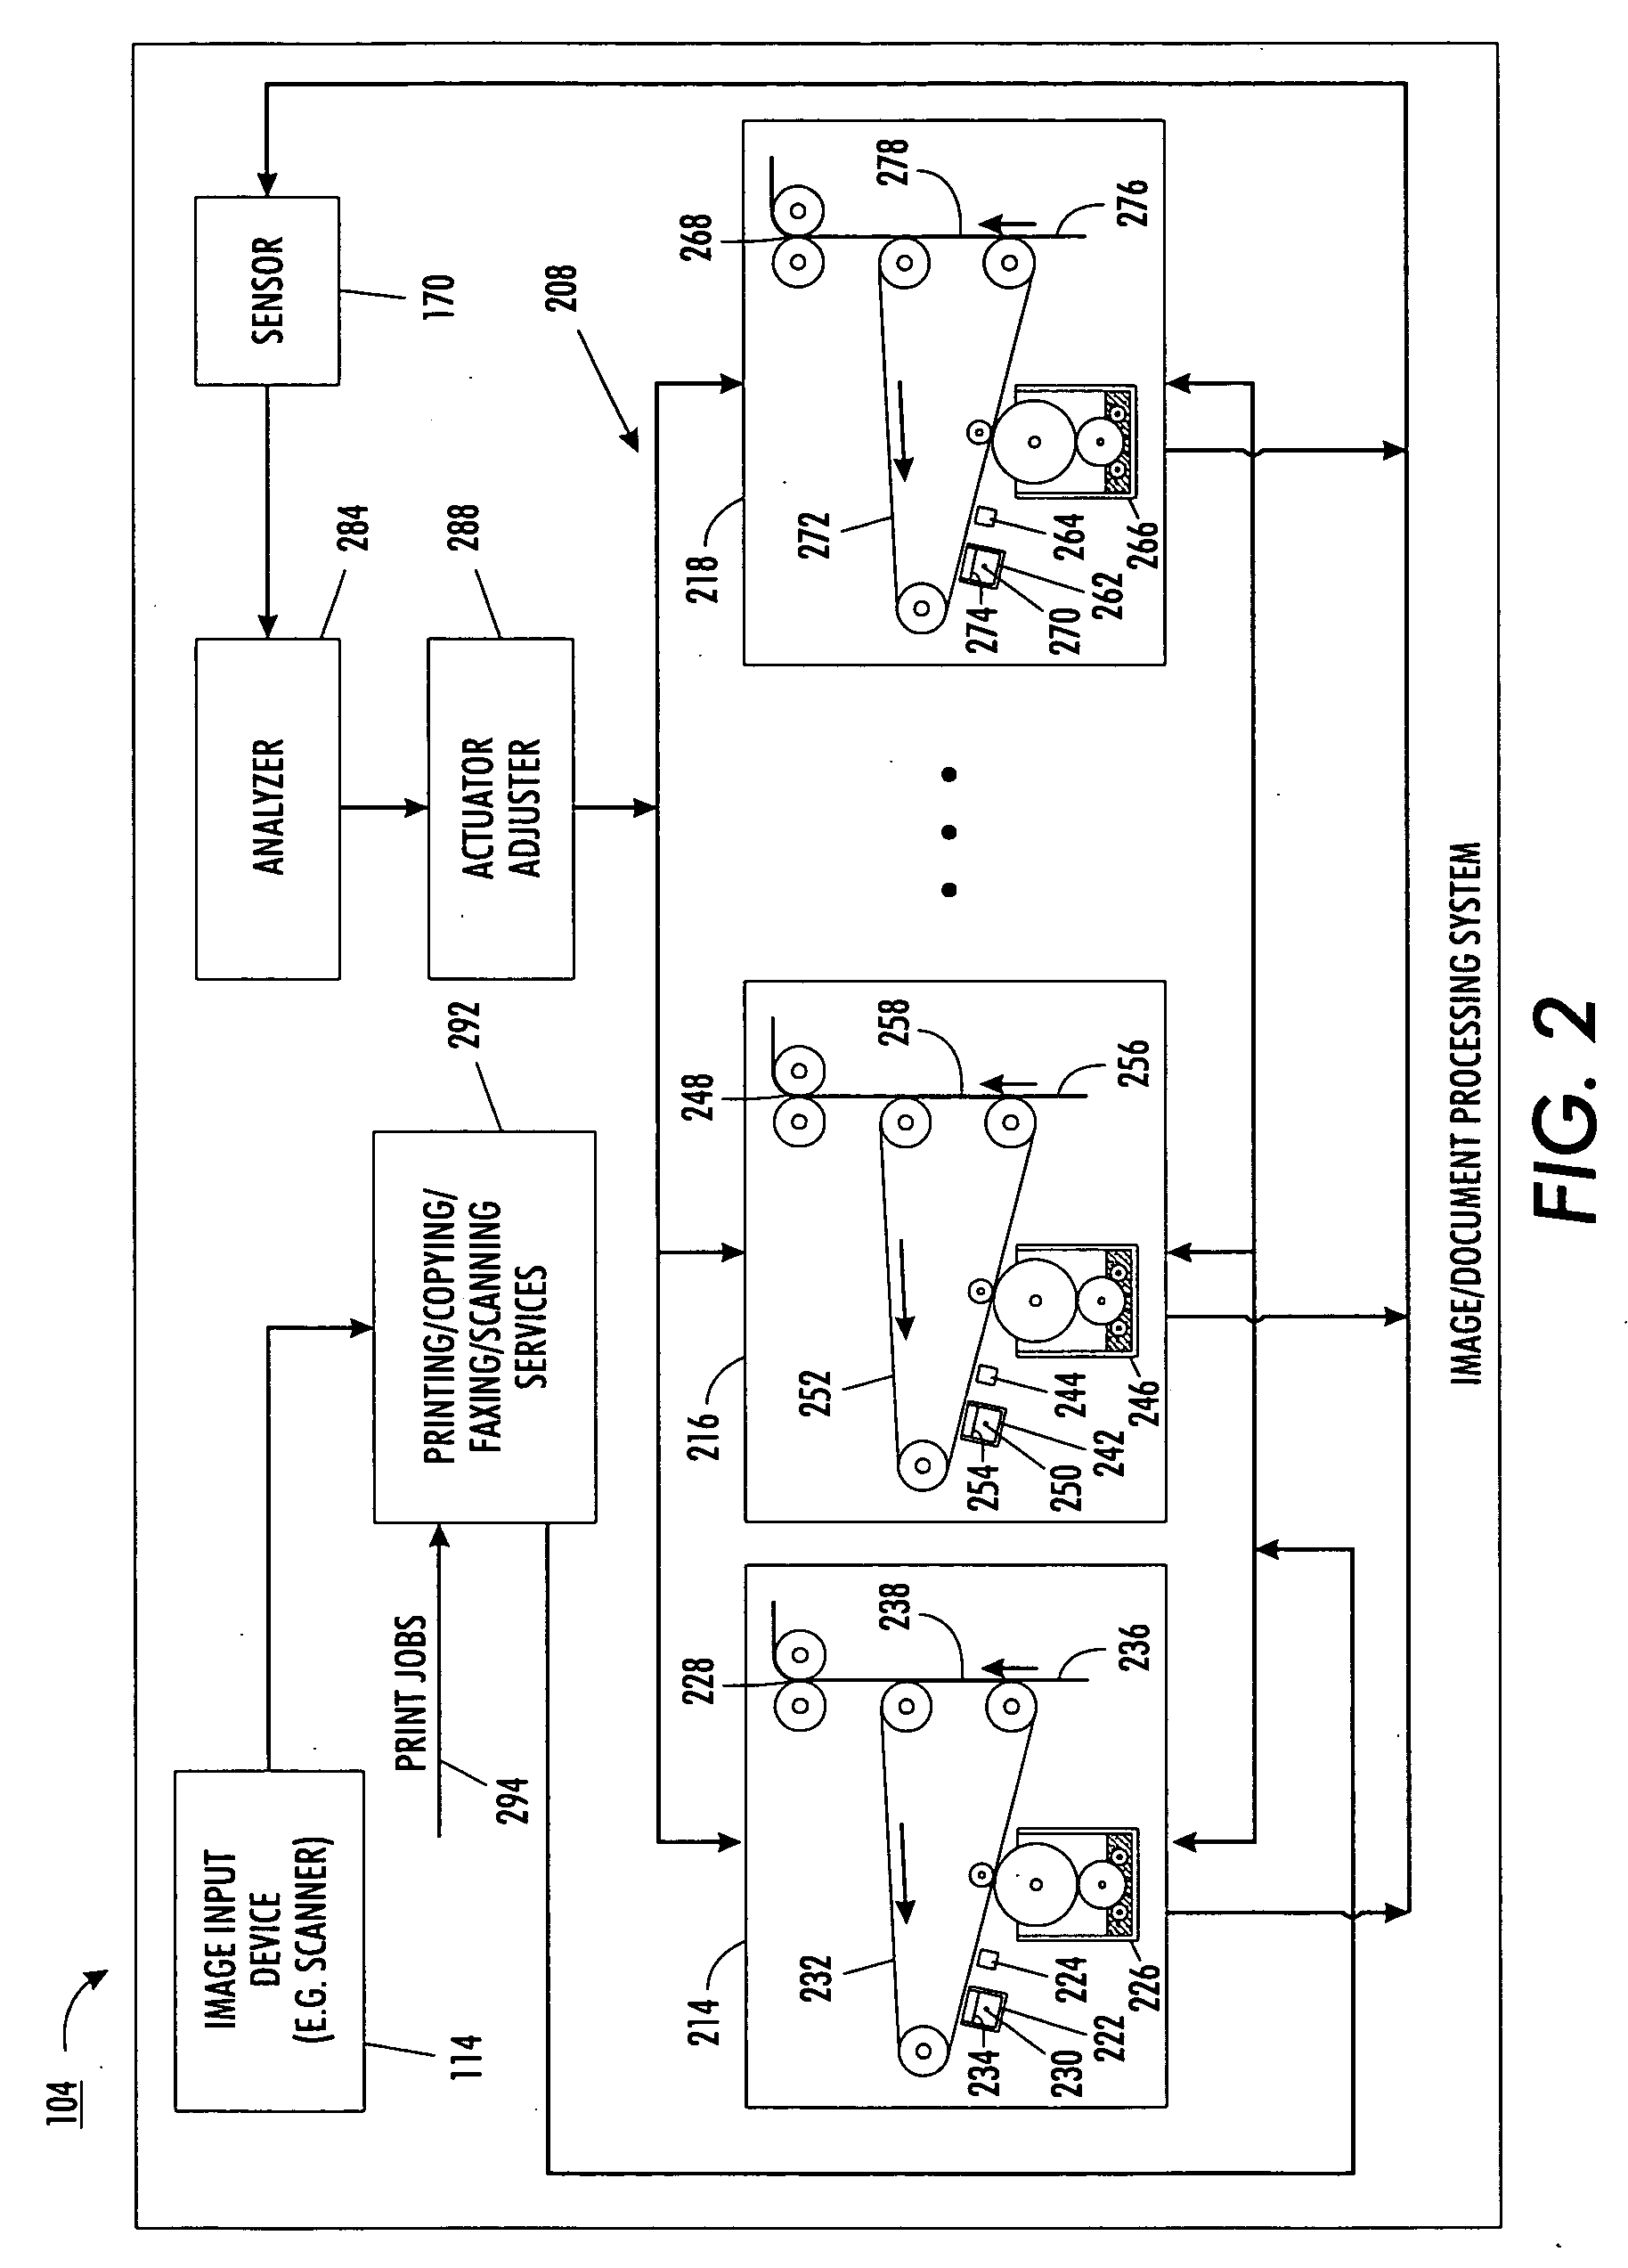 Image quality control method and apparatus for multiple marking engine systems